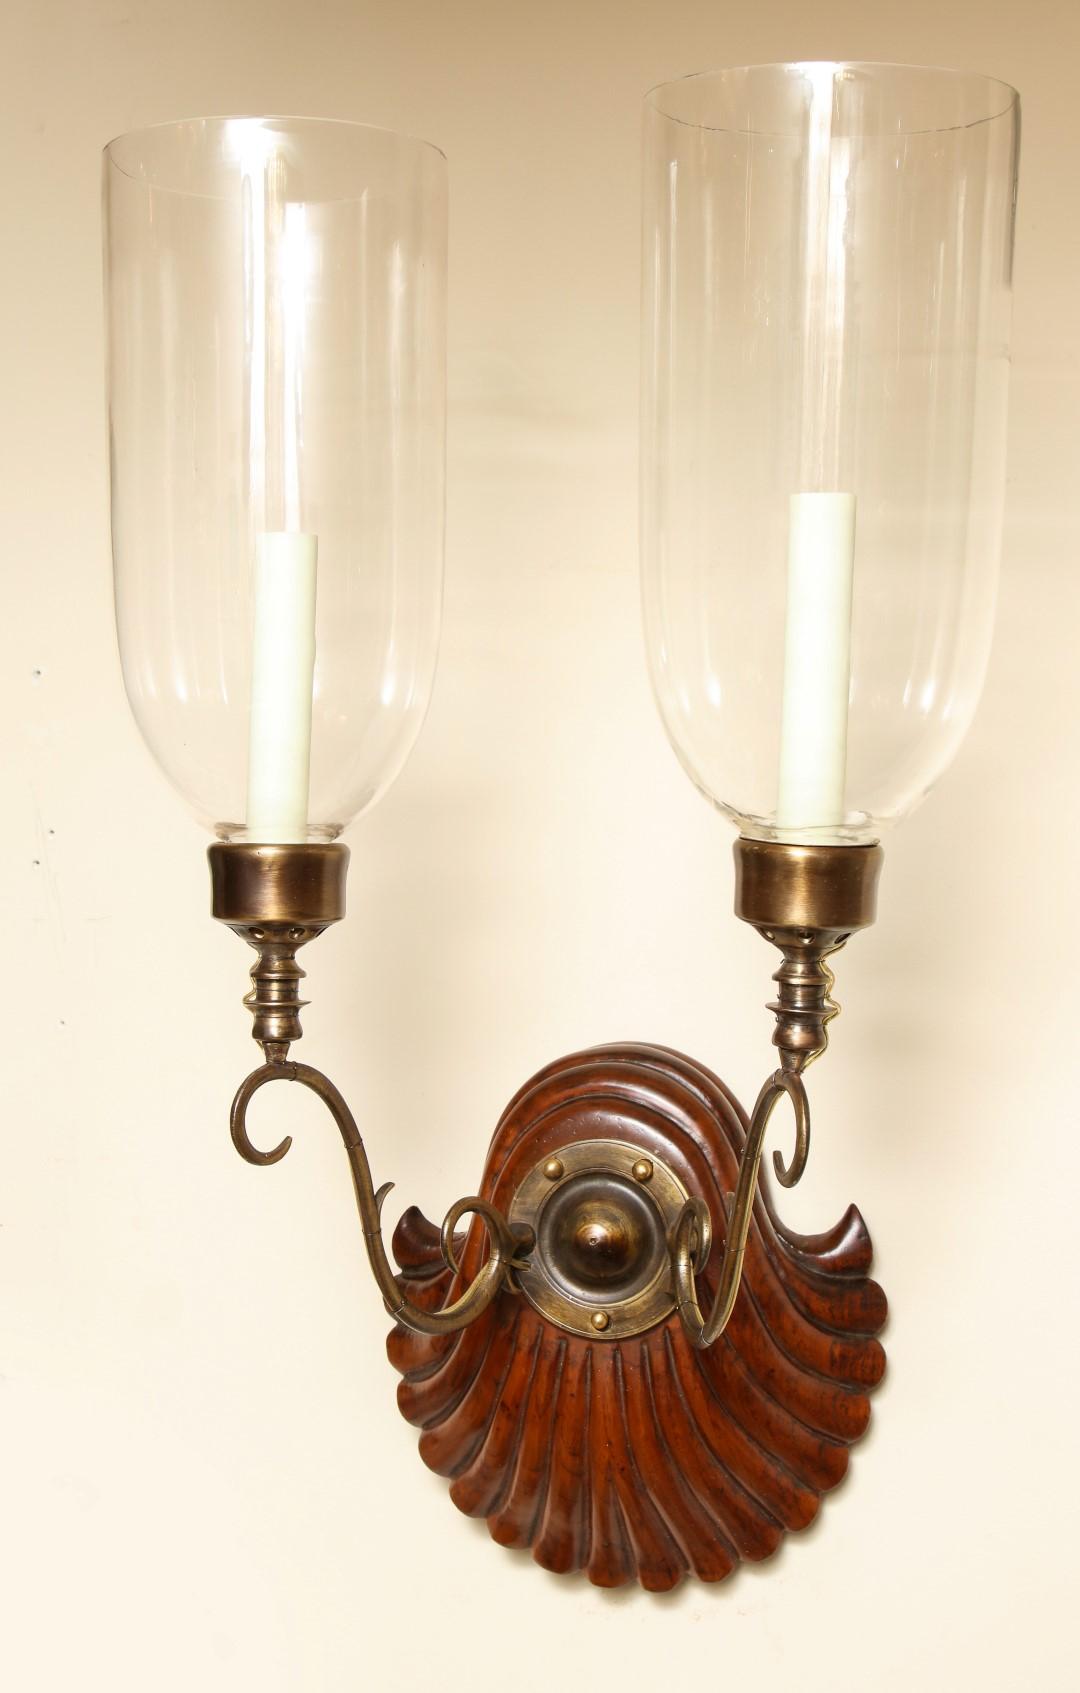 A pair of Georgian-style two-light sconces, hardwood shell form back-plate issuing bronze out-scrolled candle-arms supporting a single candelabra socket with hurricane shade. Maximum wattage per socket 60.

Our custom hurricane sconces are available